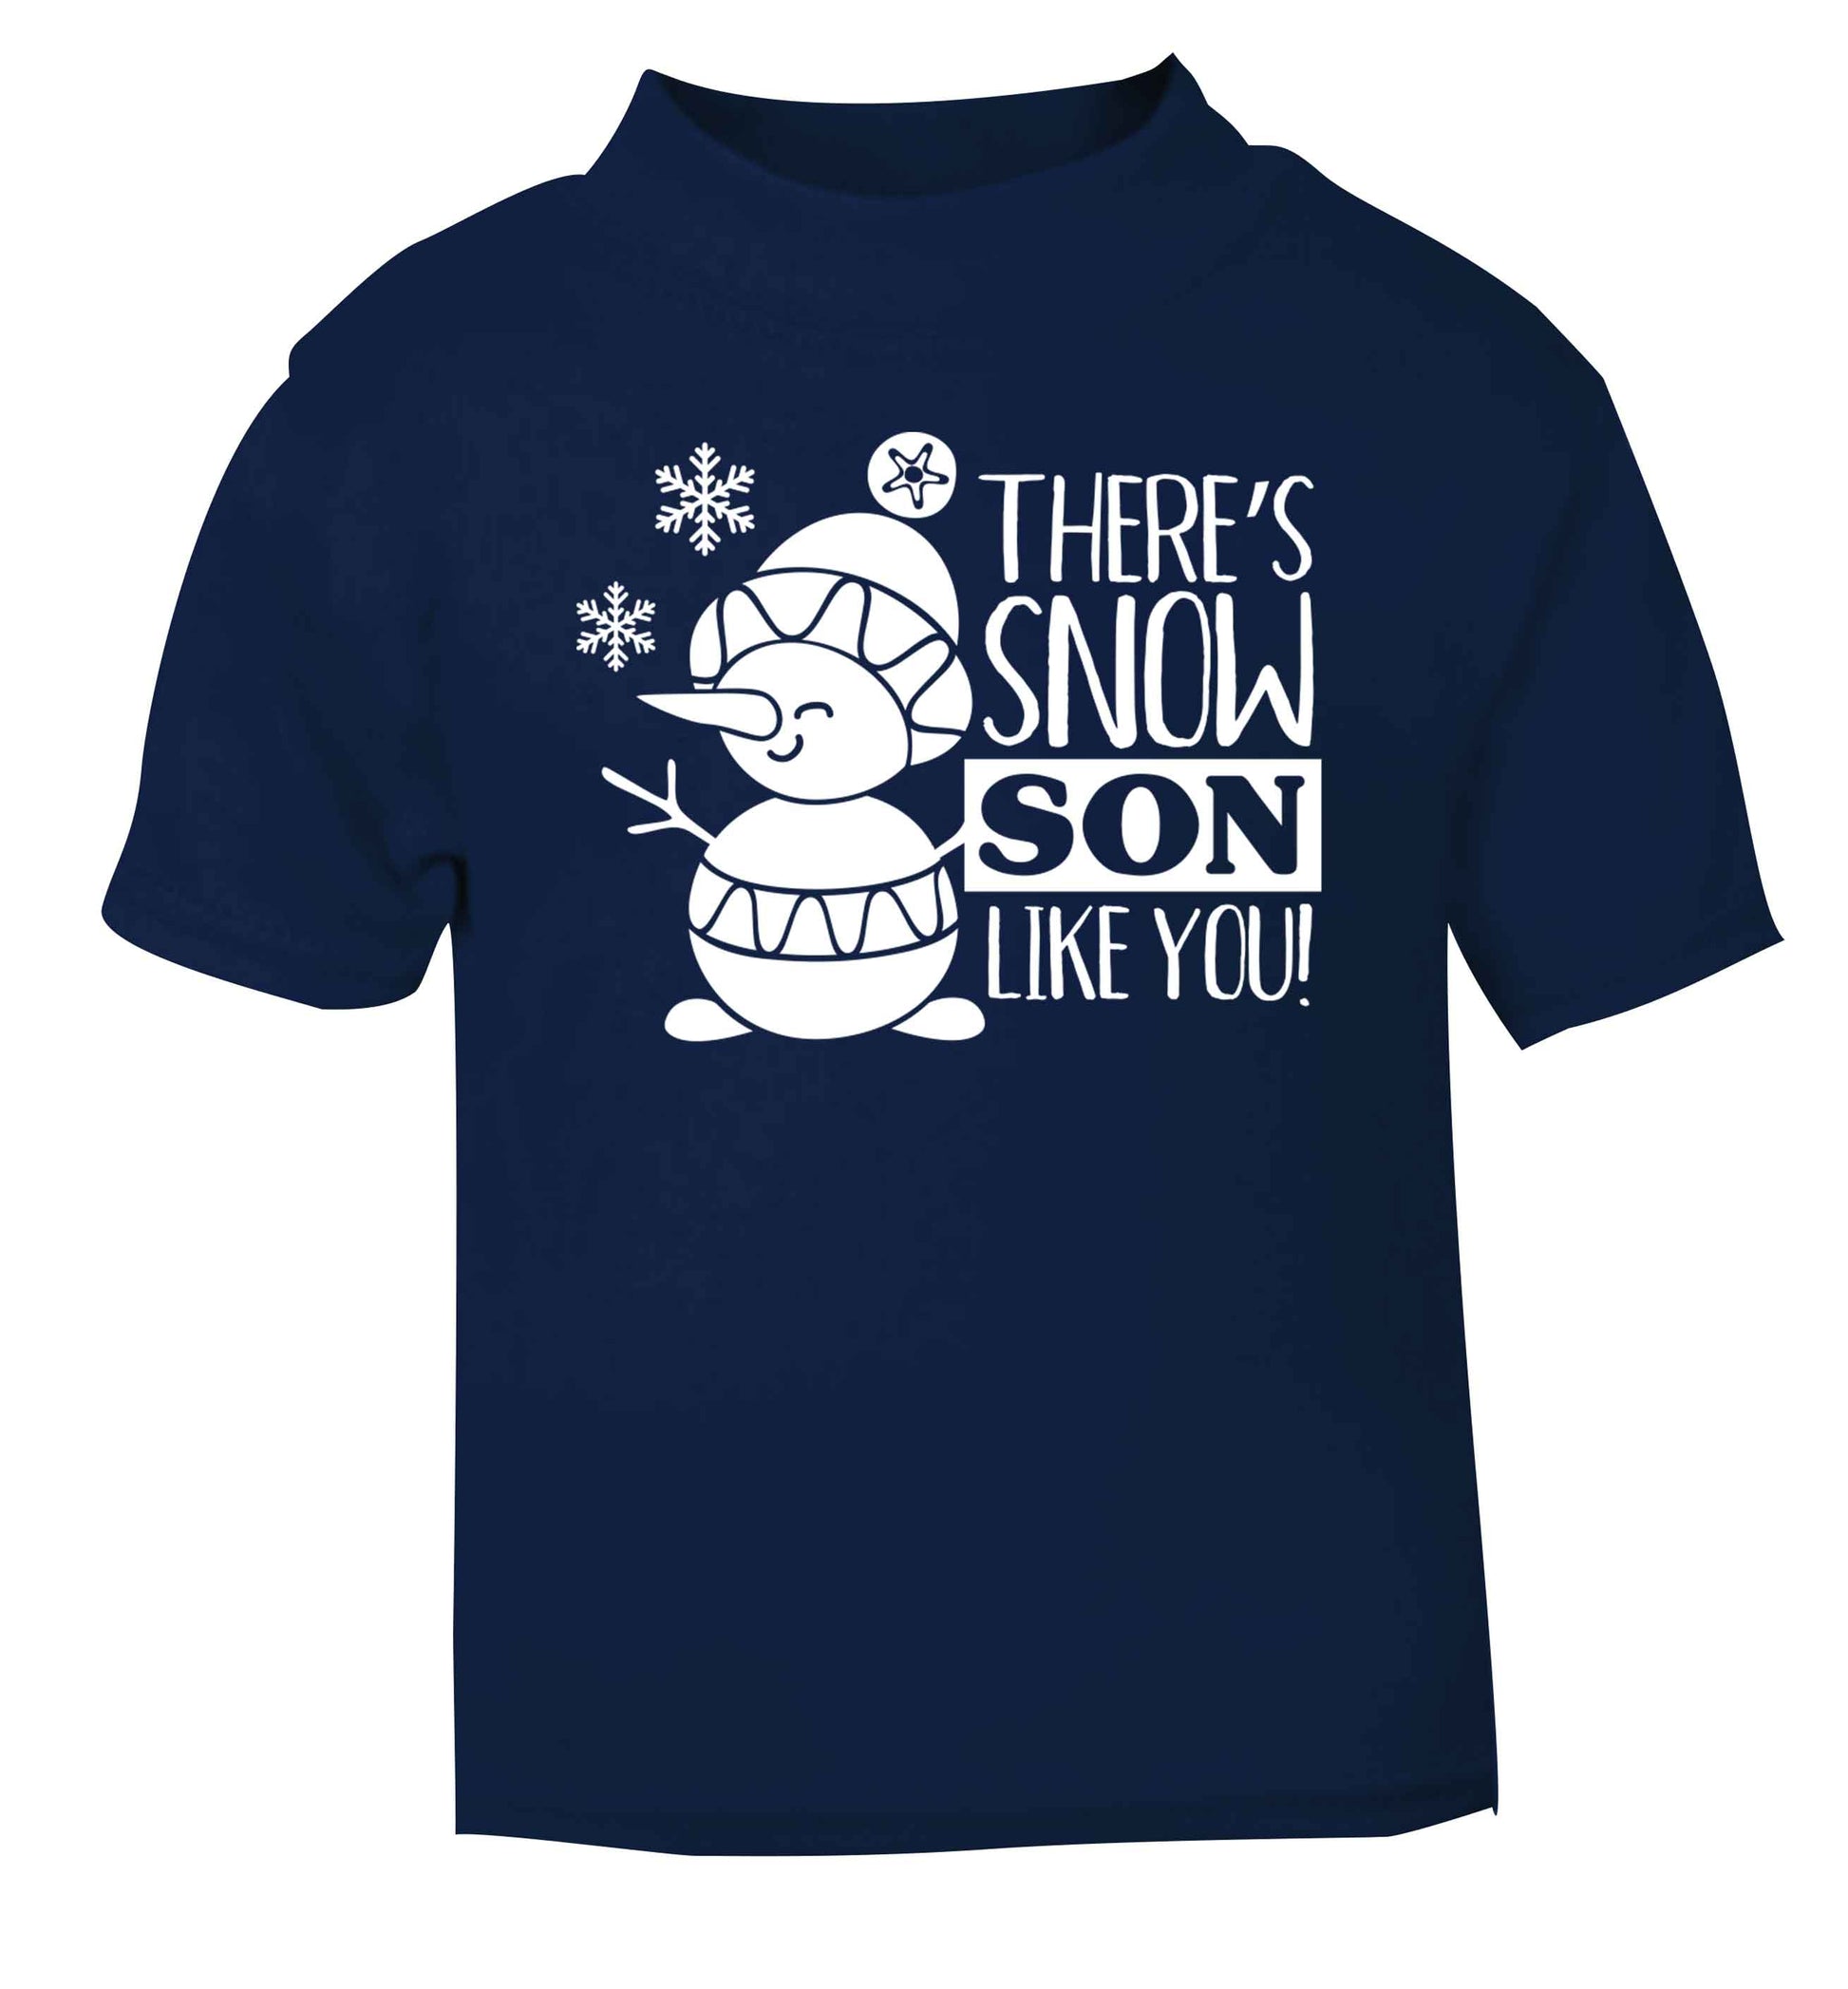 There's snow son like you navy baby toddler Tshirt 2 Years